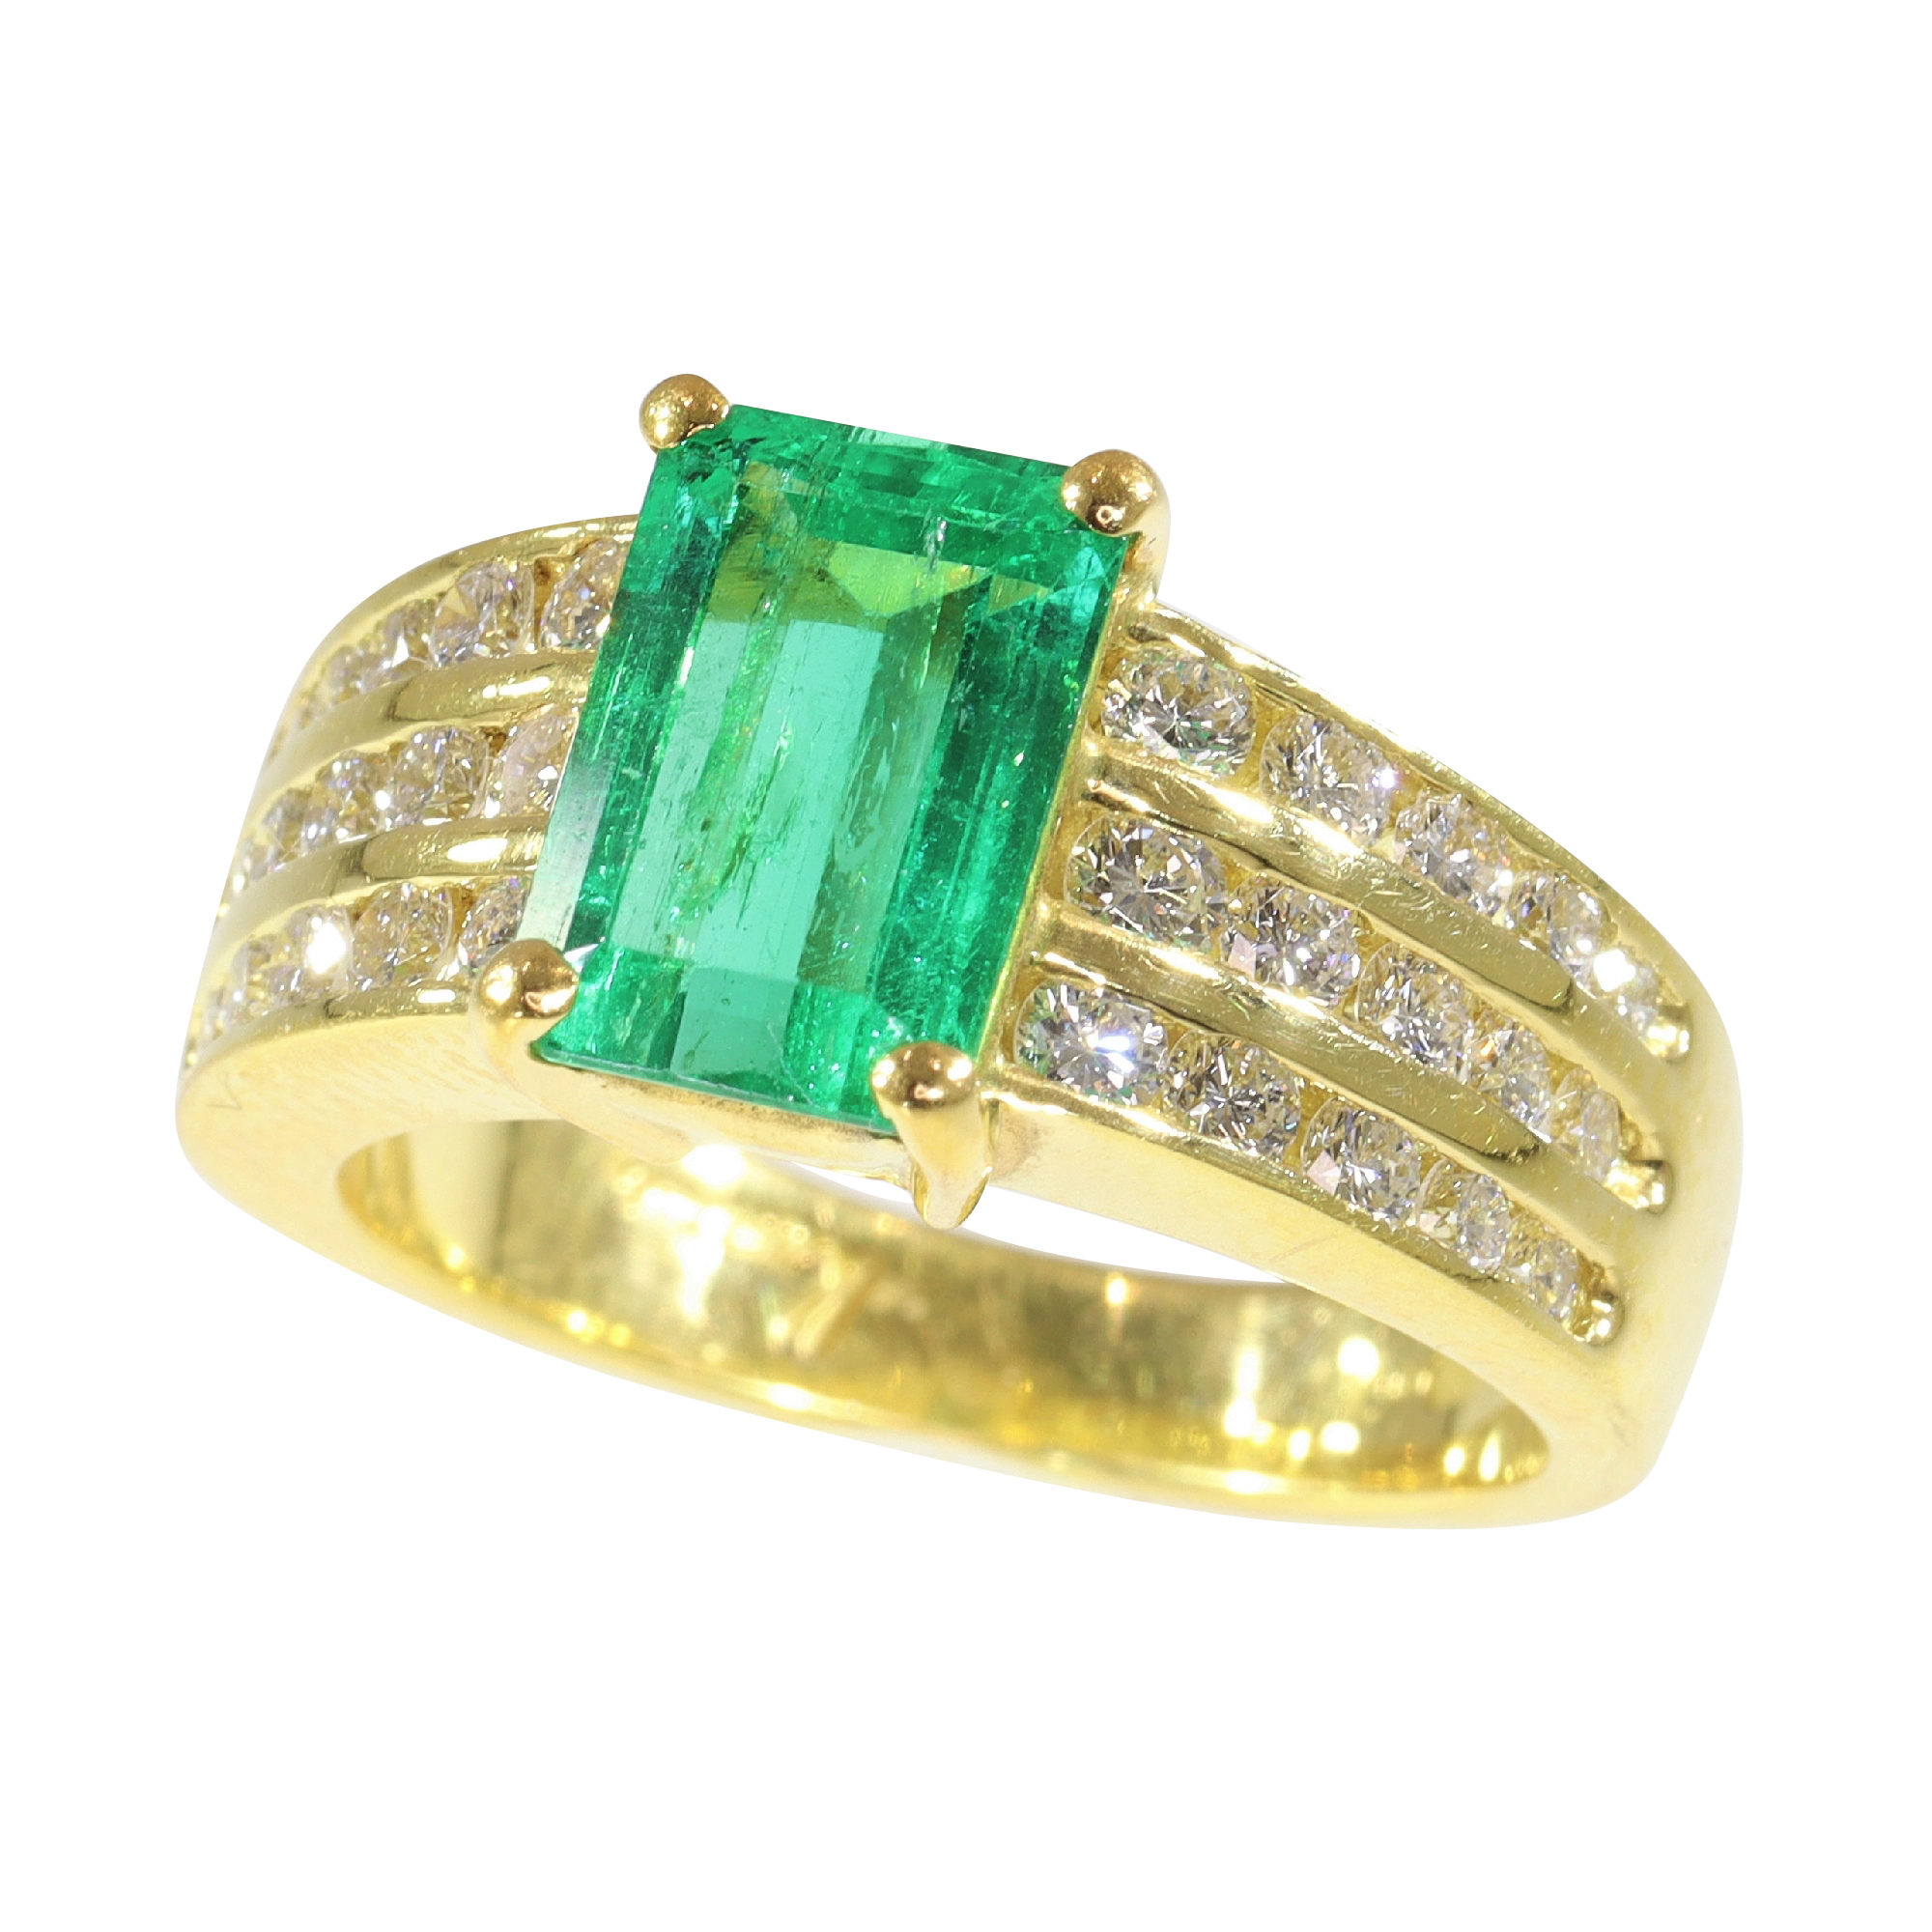 Kutchinsky s Green Splendour: 2.33ct Emerald Engagement Ring with Diamond Accents